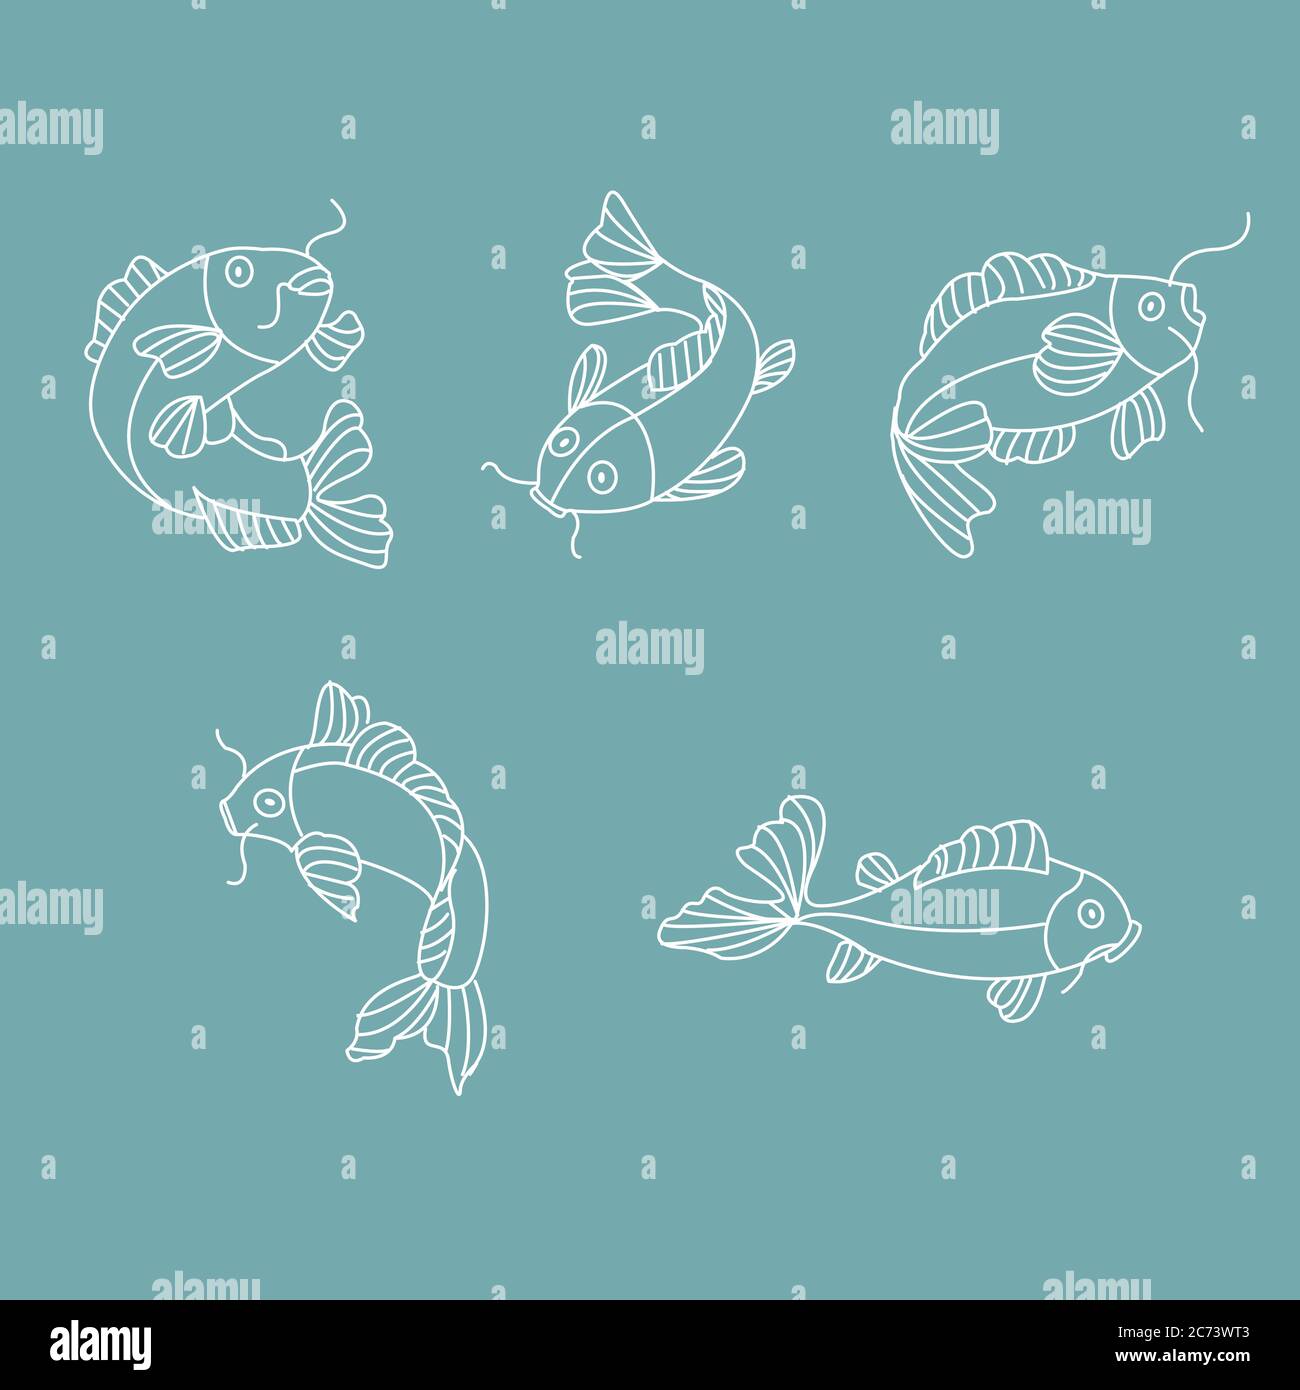 Line art drawing of a carp fish with various swimming pose. Stock Vector